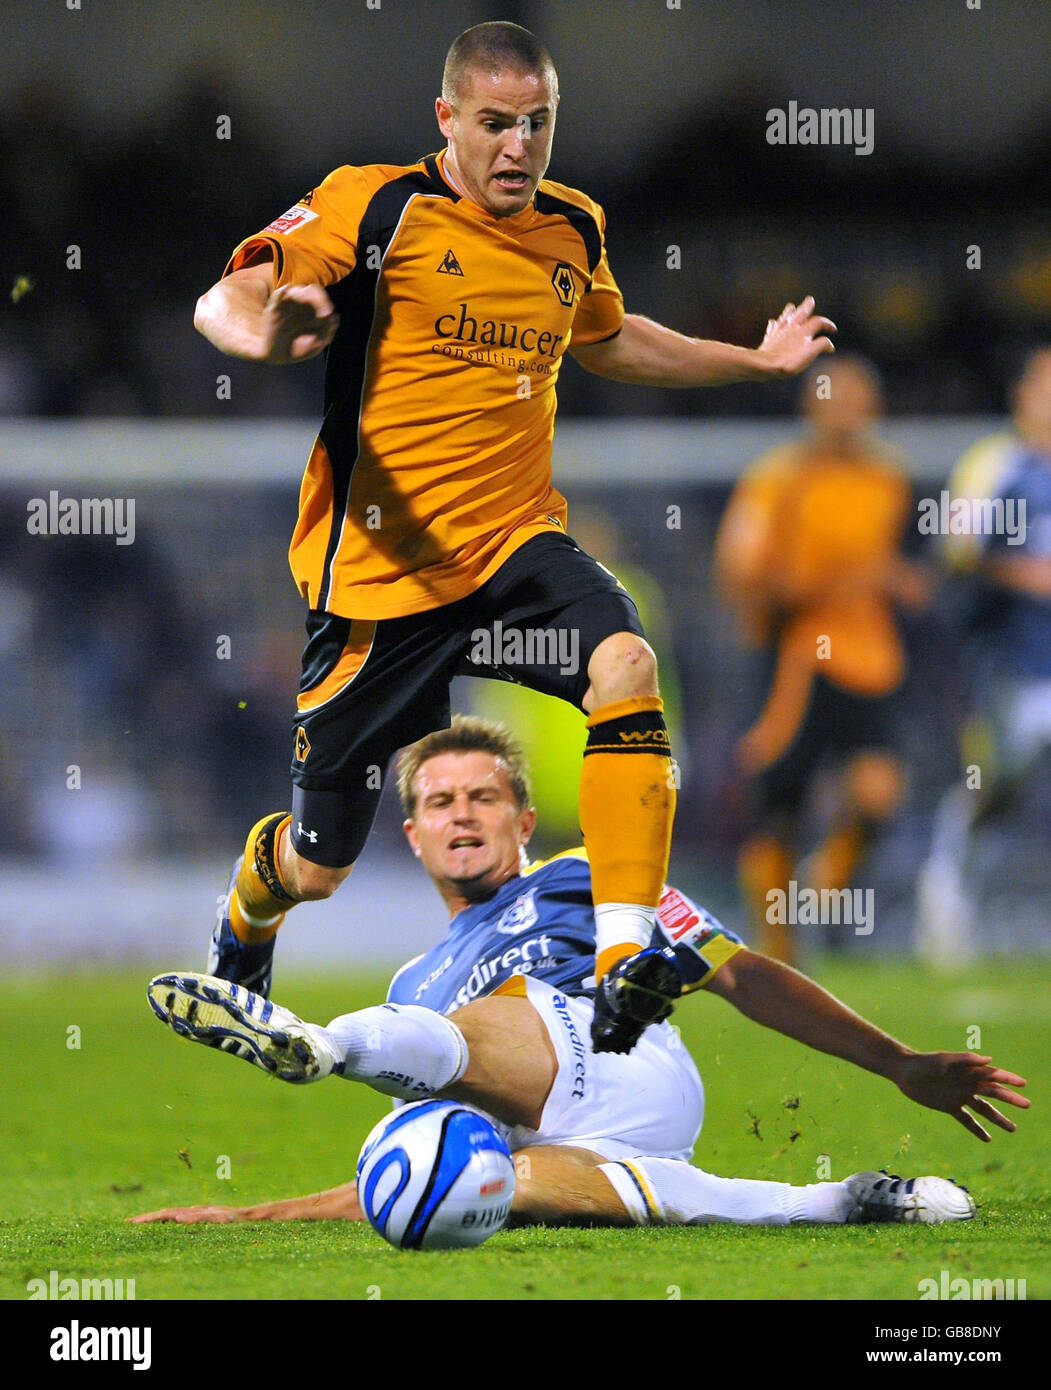 Cardiff City's Stephen McPhail is beaten by Wolverhampton Wanderers' Michael Kightly during the Coca-Cola Championship match at Ninian Park, Cardiff. Stock Photo